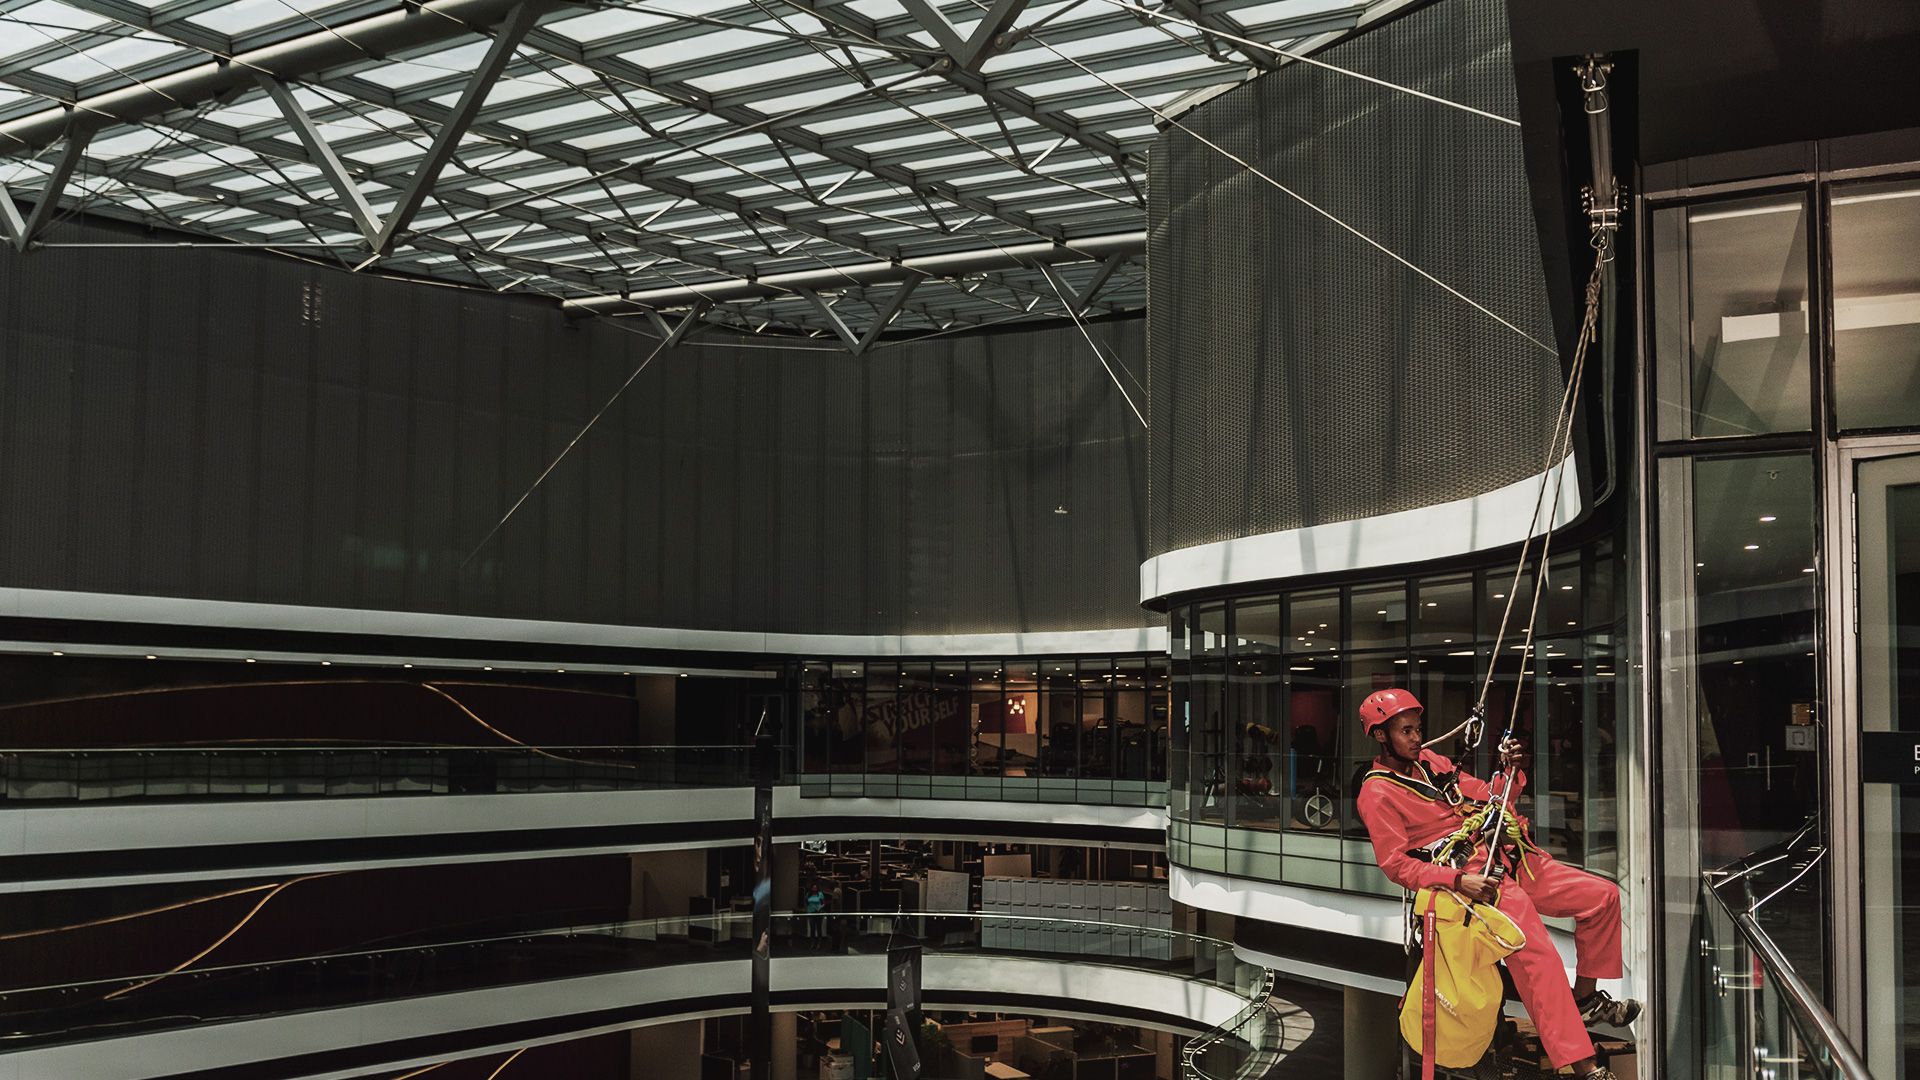 SafeAccess monorail for abseiling works in a mall